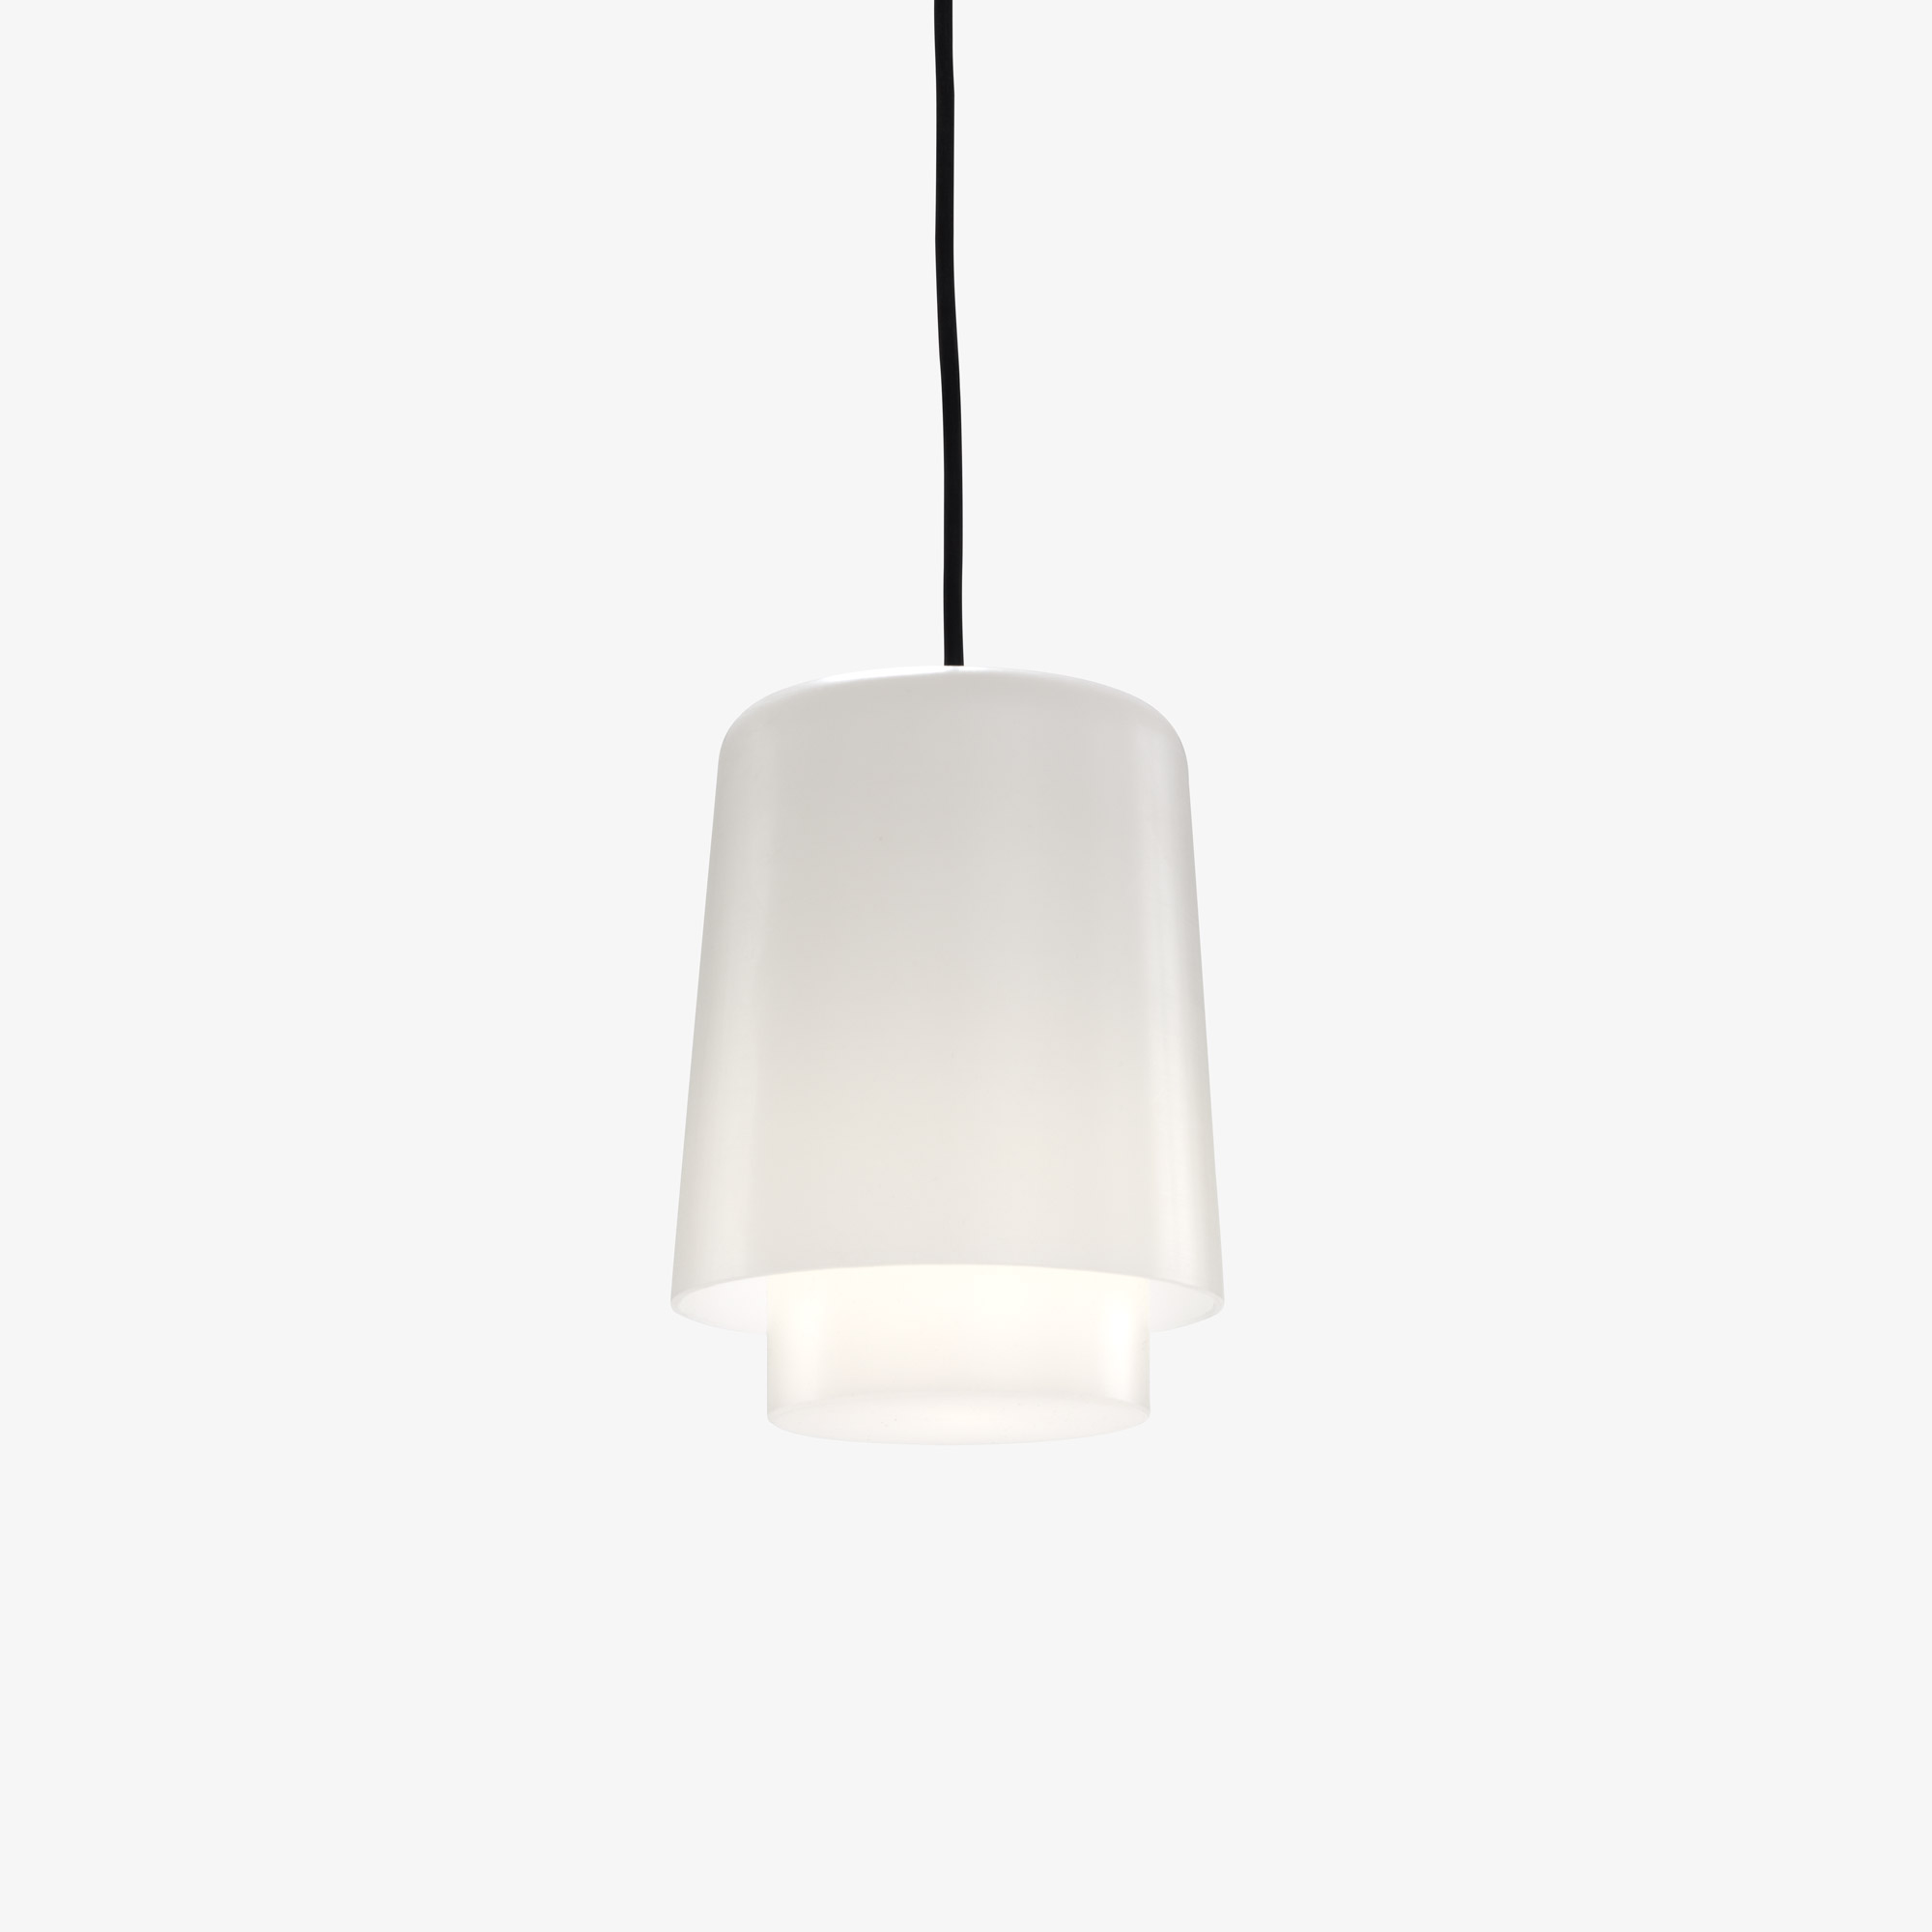 Image Suspended / portable light / table lamp indoor / outdoor  2